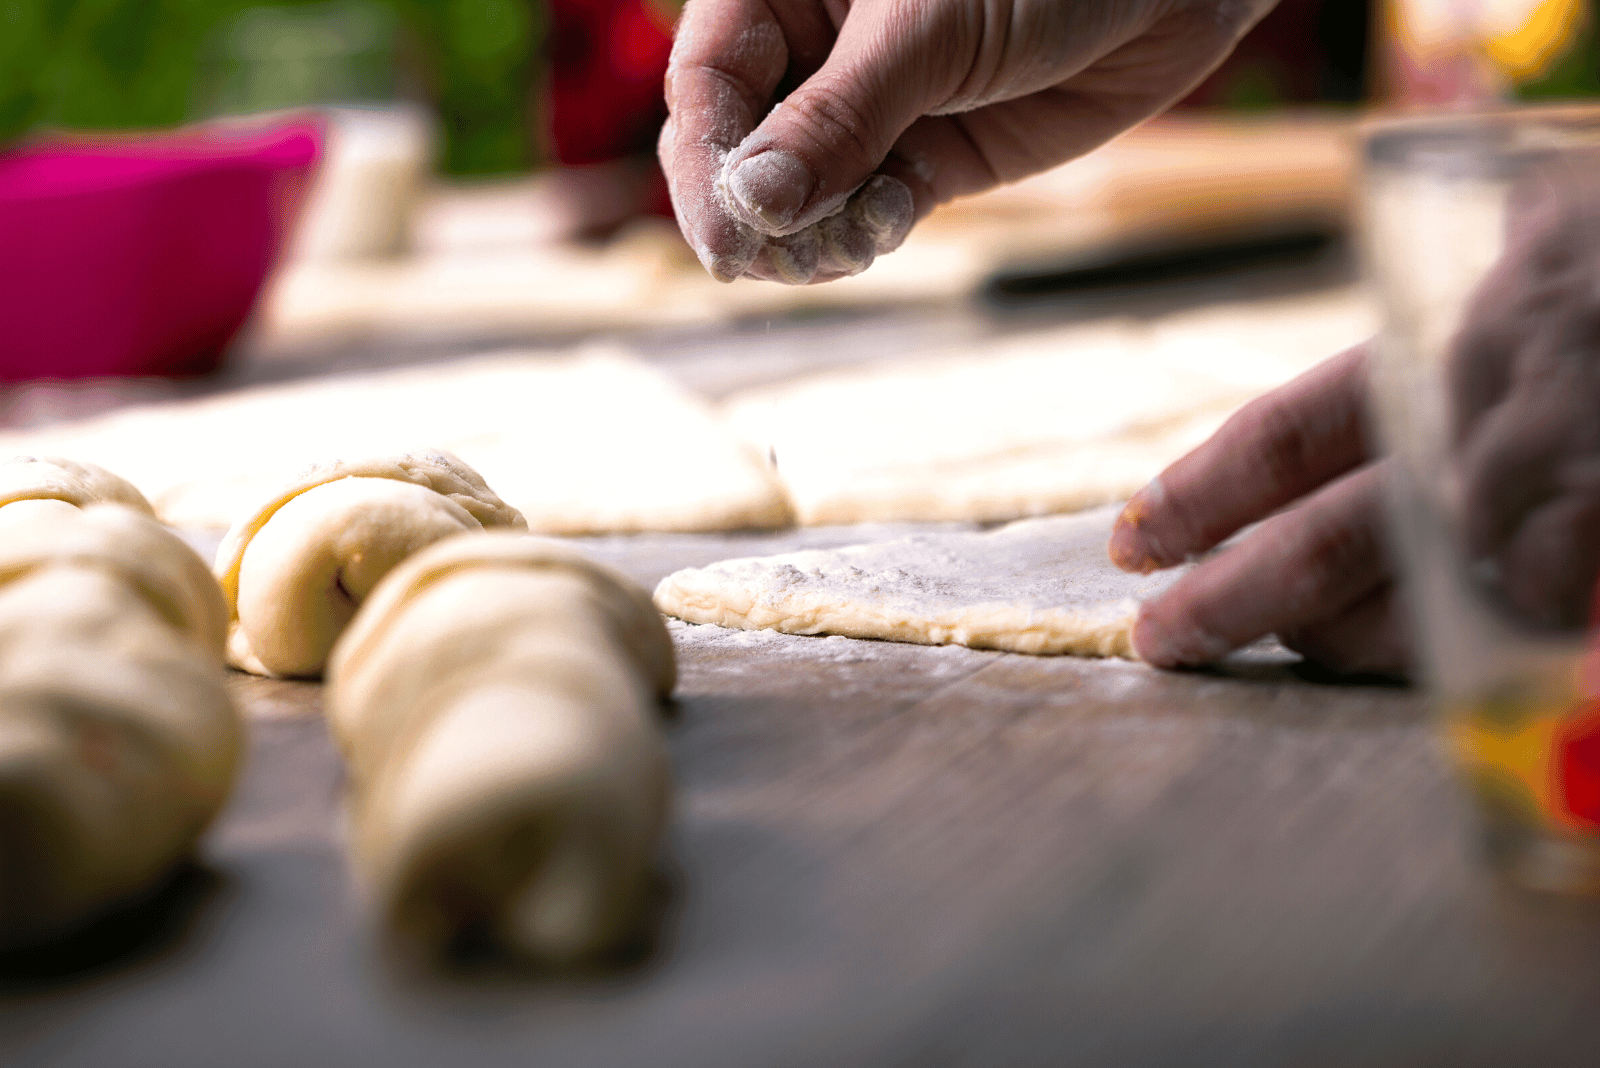 Learn the art of croissant making